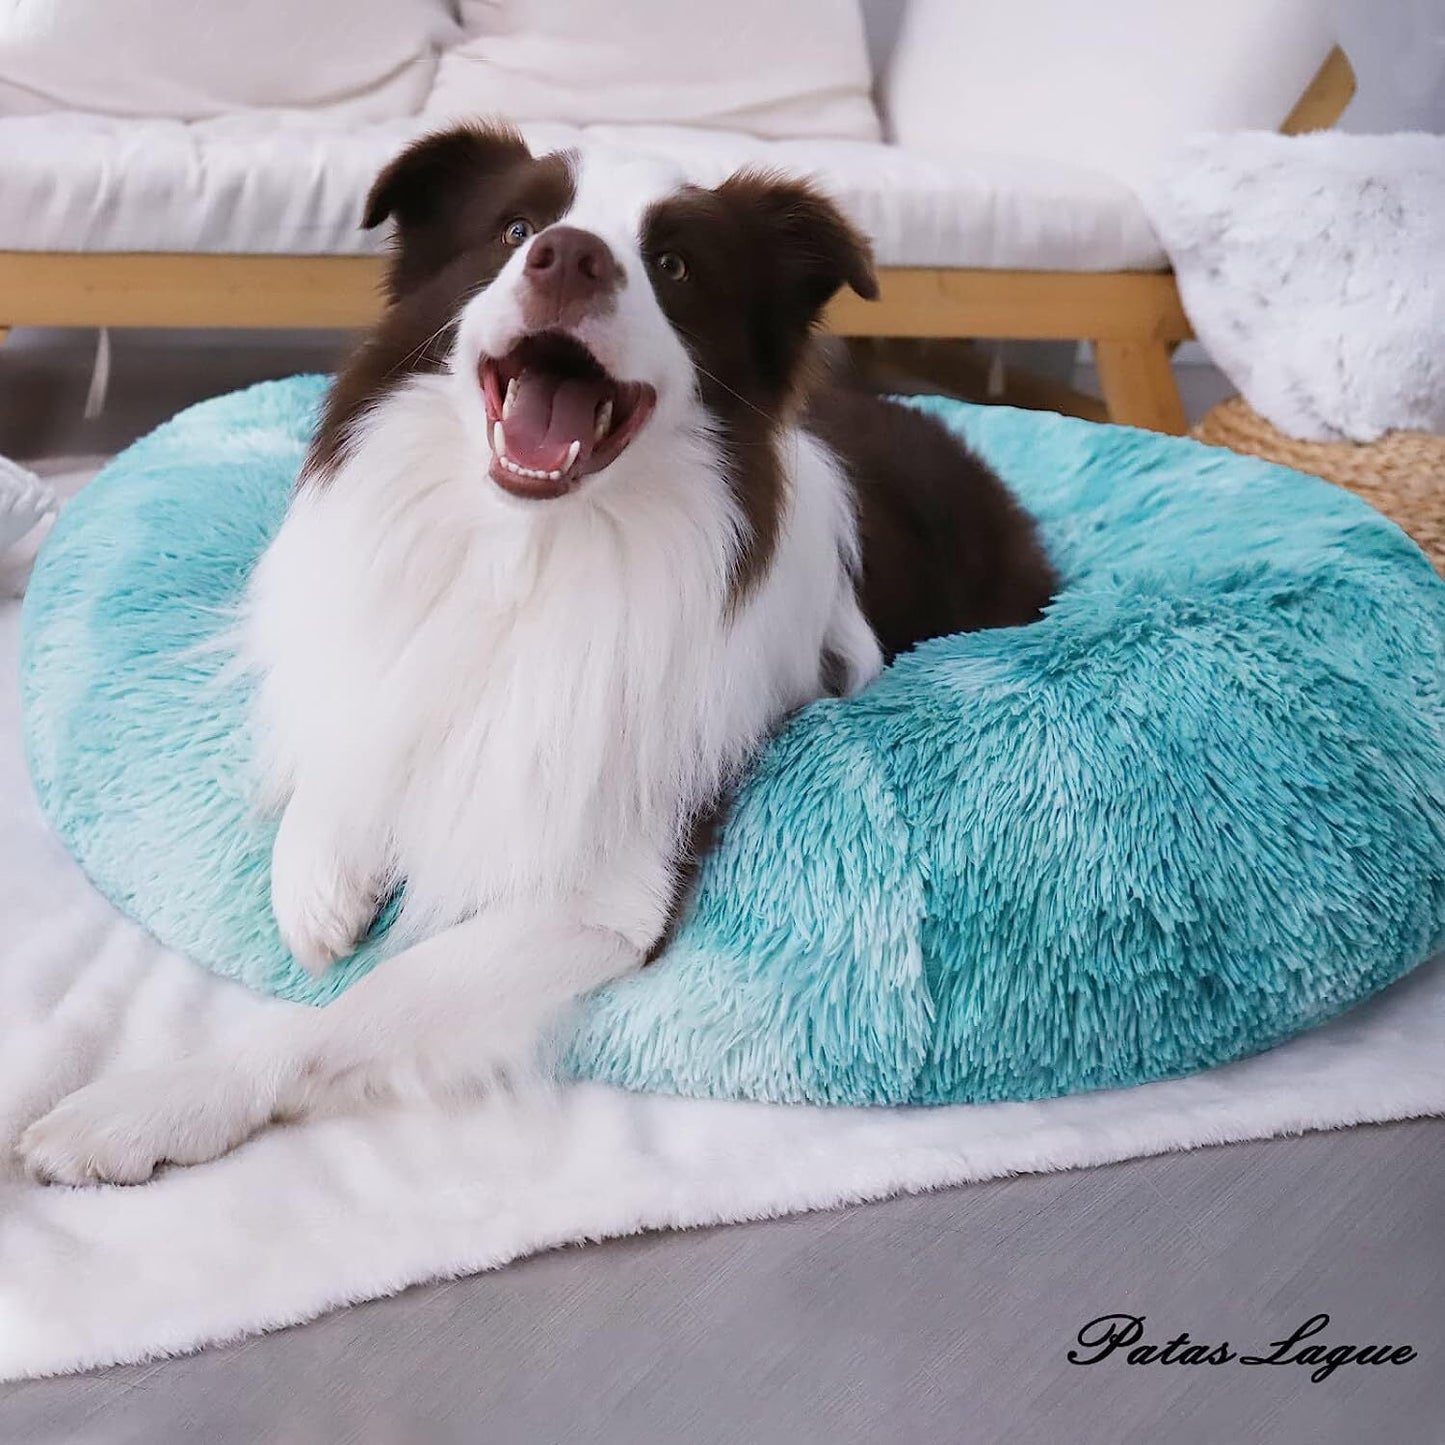 Exclusivo Mezcla Calming Donut Dog Bed Cat Bed for Small Medium Large Dogs and Cats Anti-Anxiety Plush Soft and Cozy Cat Bed Warming Pet Bed for Winter and Fall (24IN, Gradient Aqua)